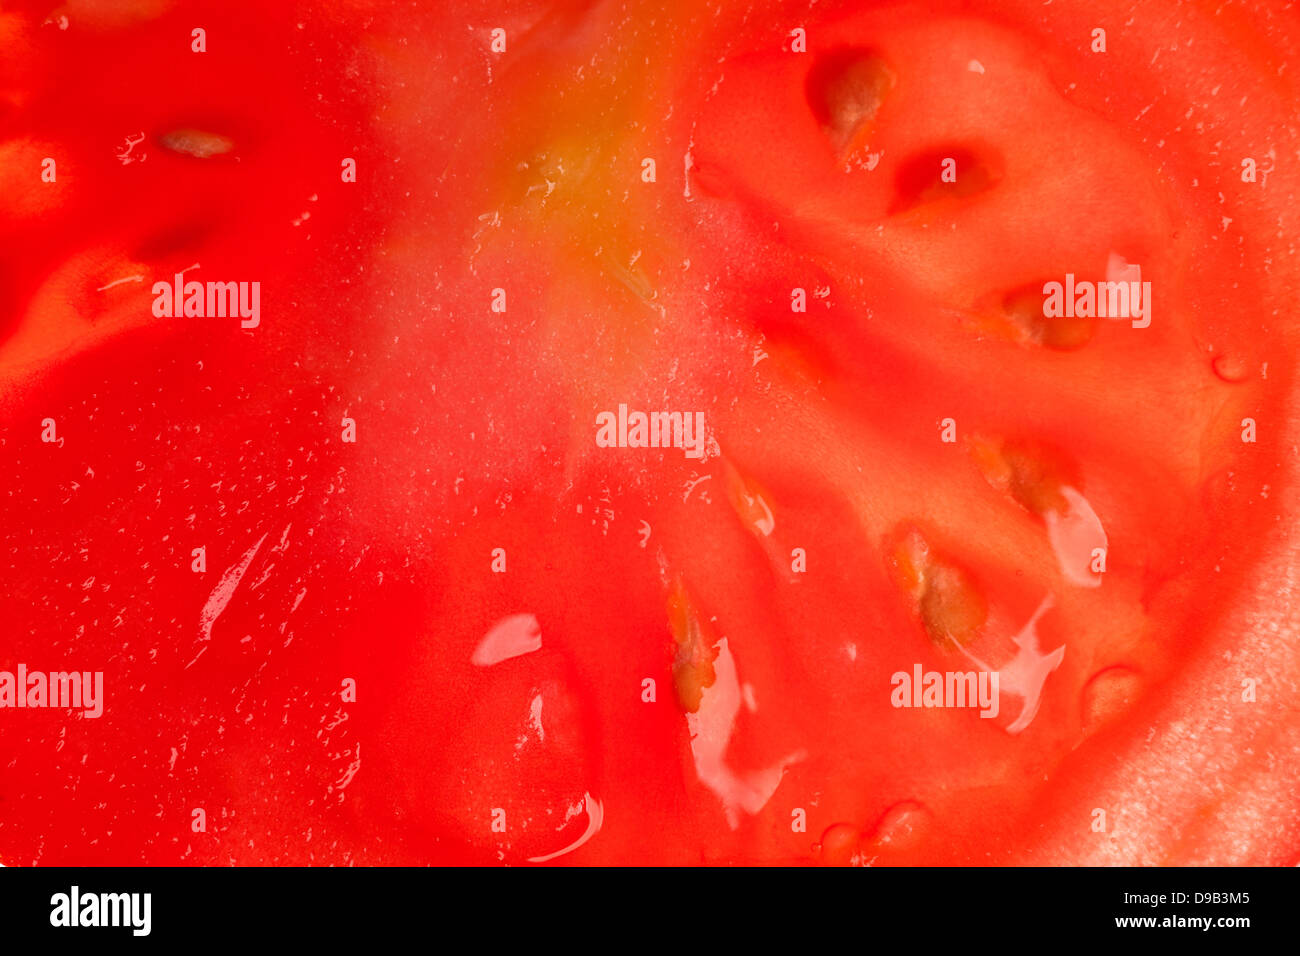 tomato slice background or red organic texture Stock Photo